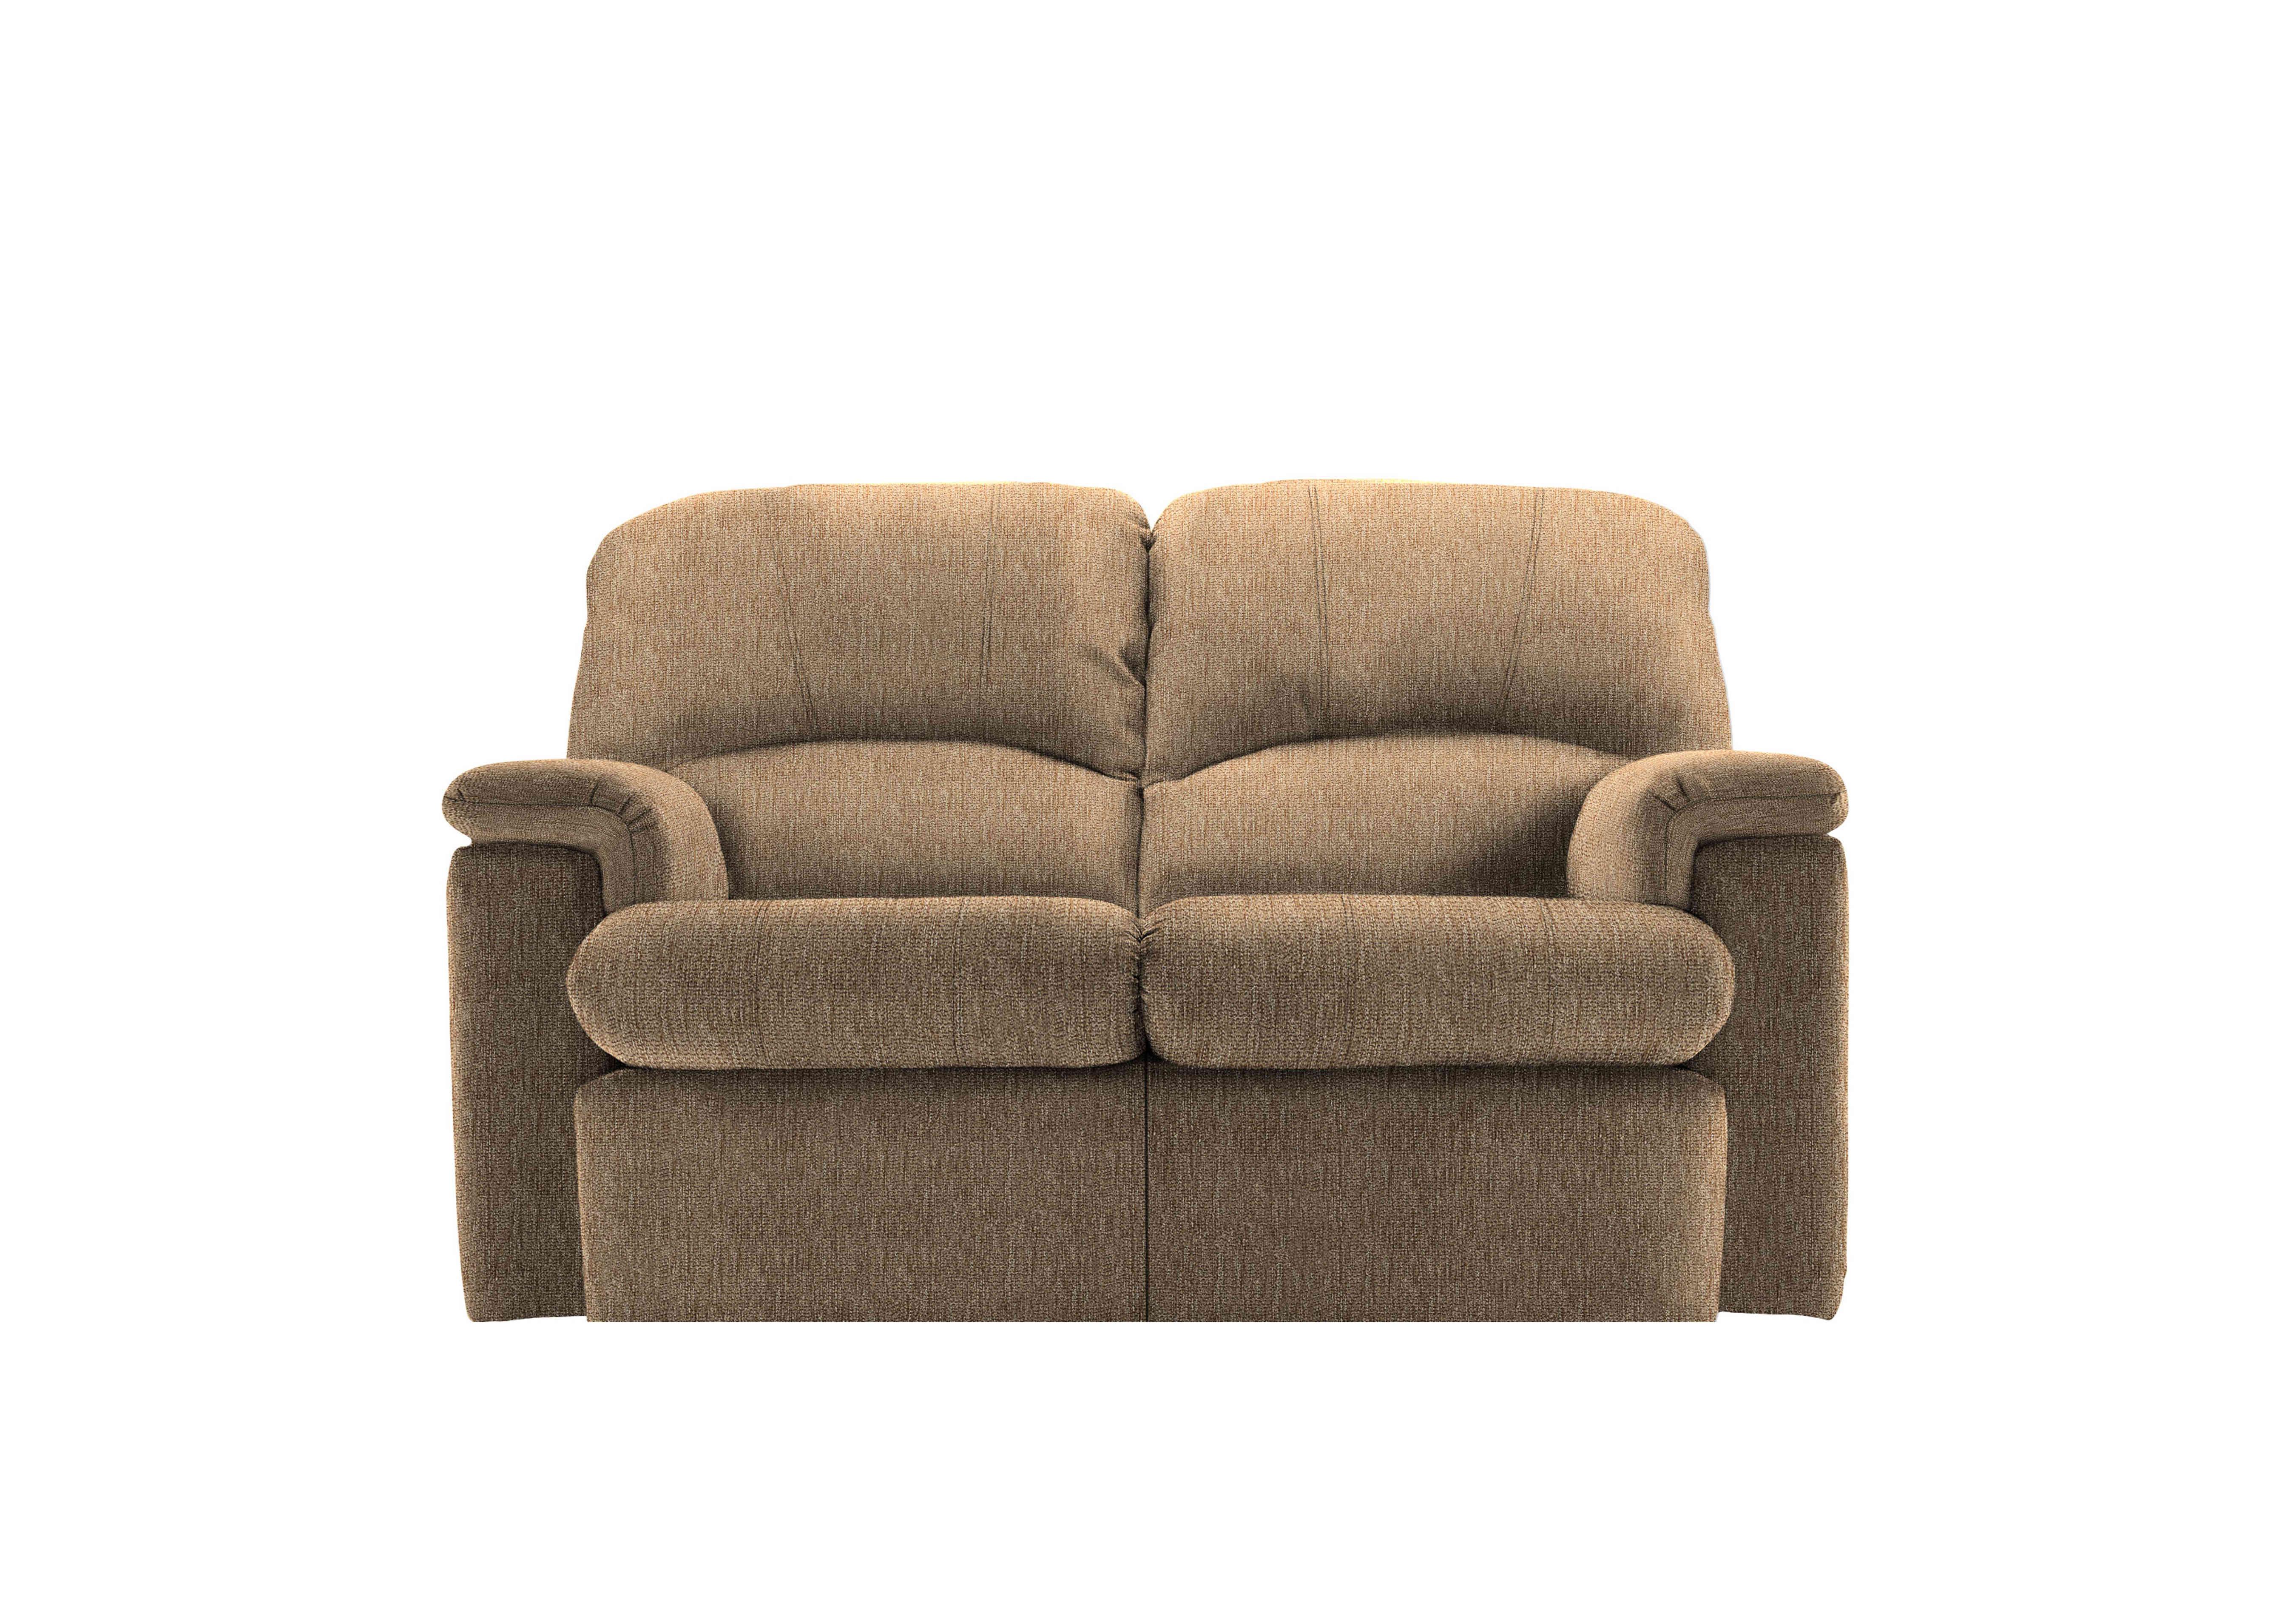 Chloe 2 Seater Fabric Sofa in A070 Boucle Cocoa on Furniture Village